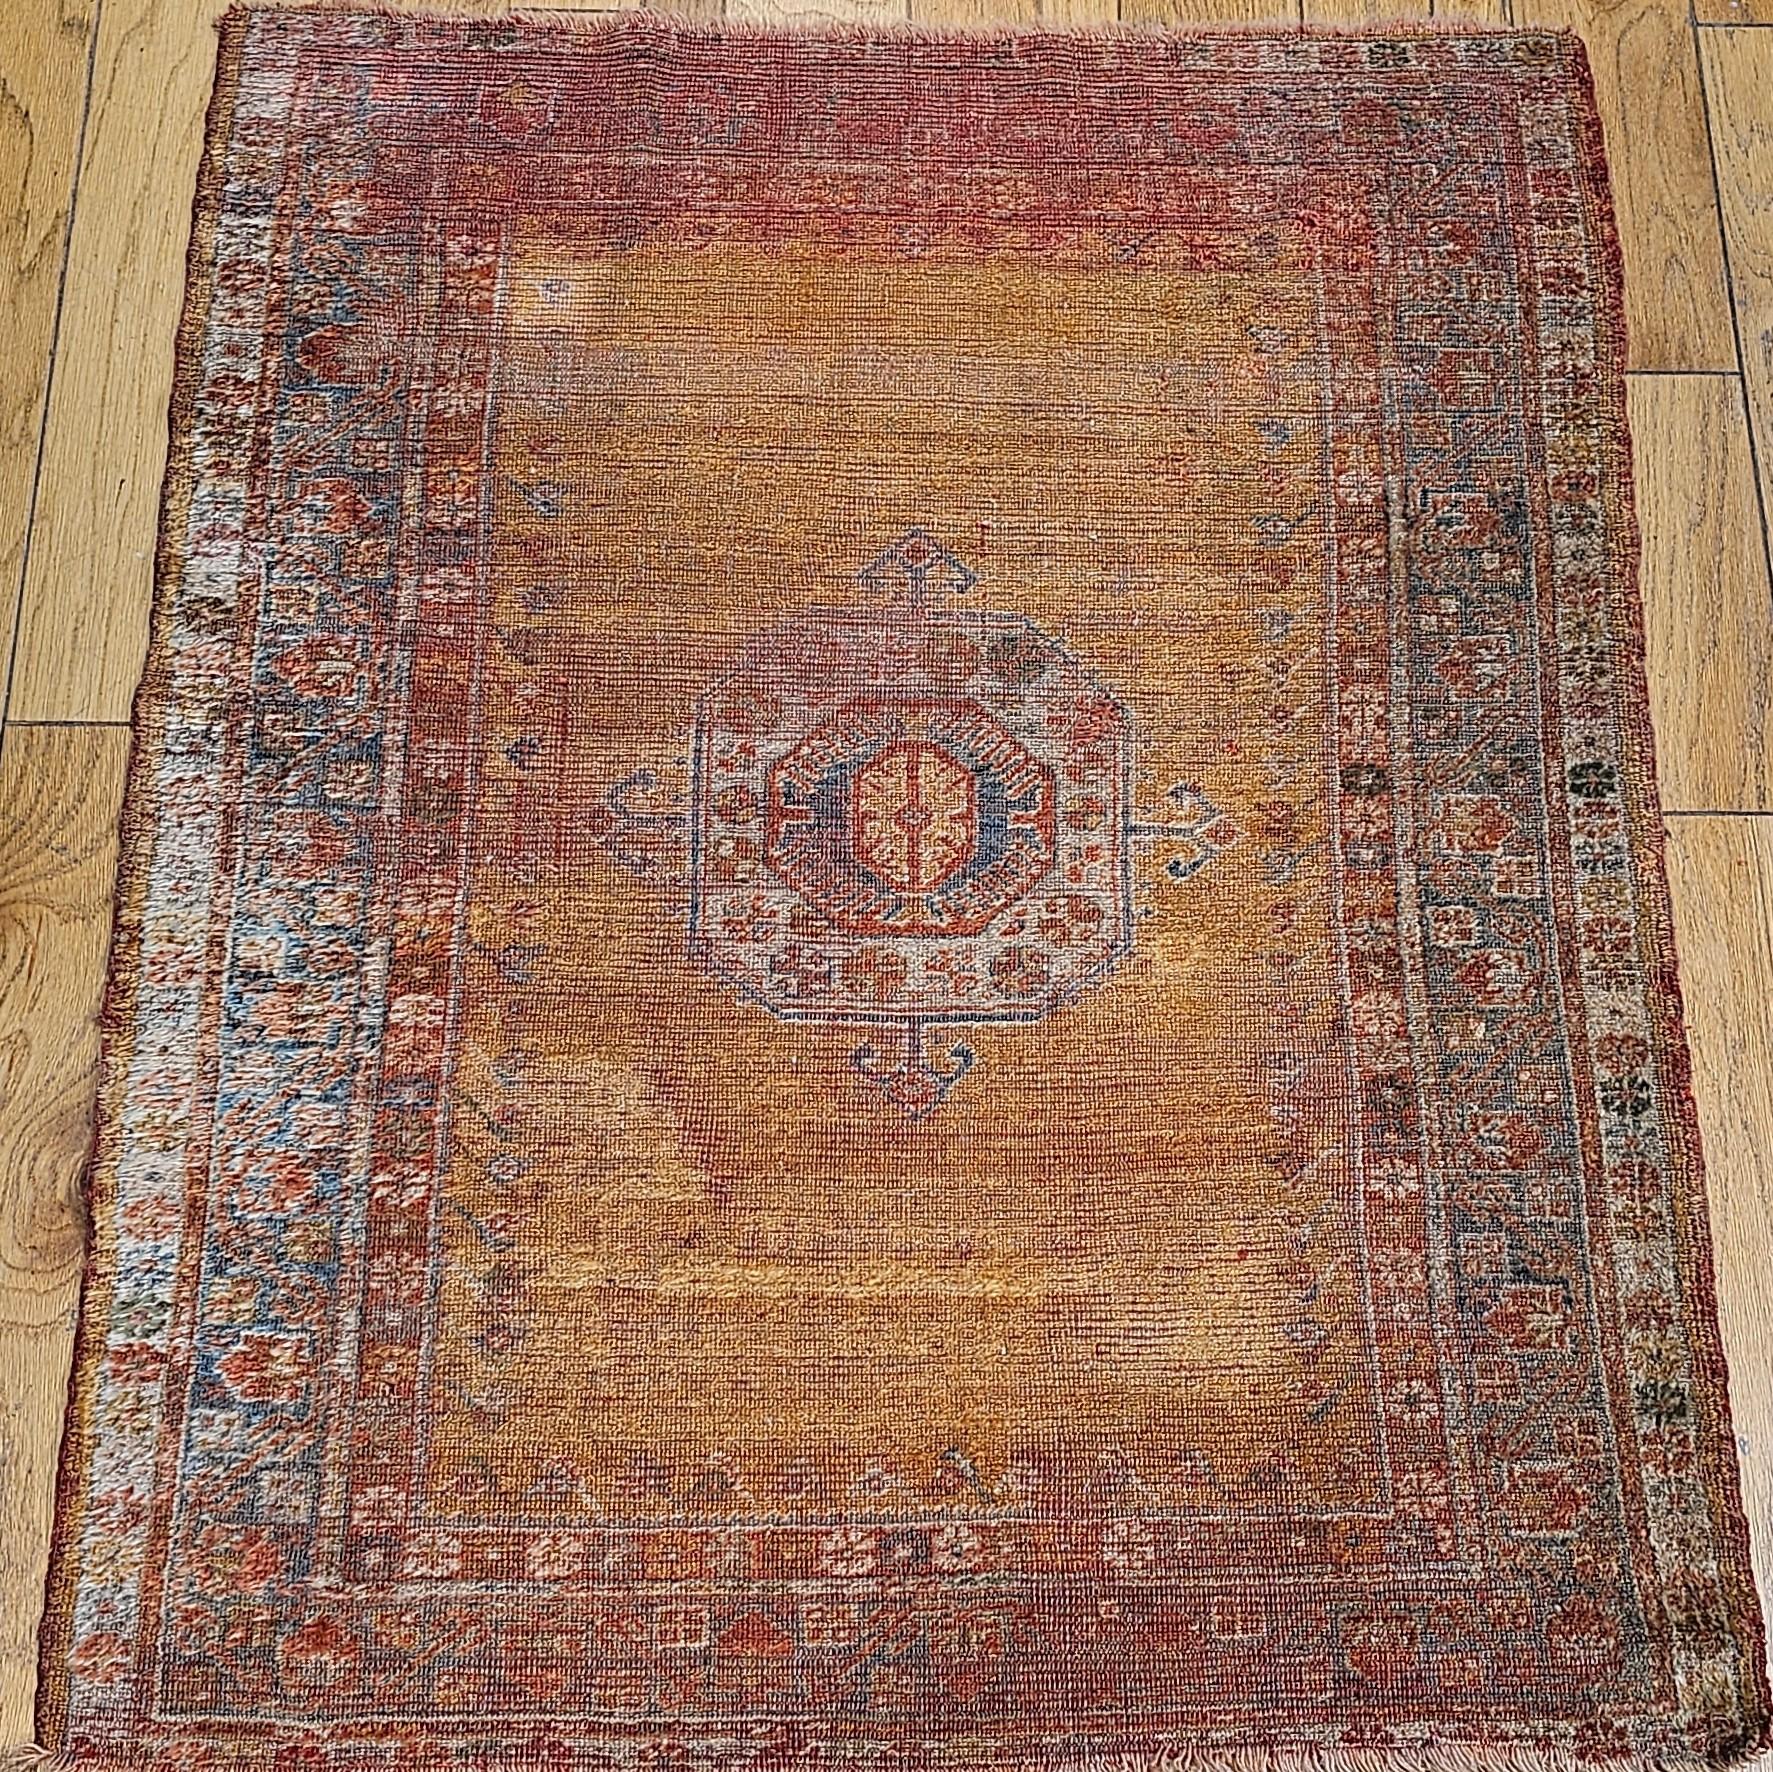 Late 19th Century Turkish Oushak Area Rug in Mamluk Pattern in Saffron, Teal For Sale 14